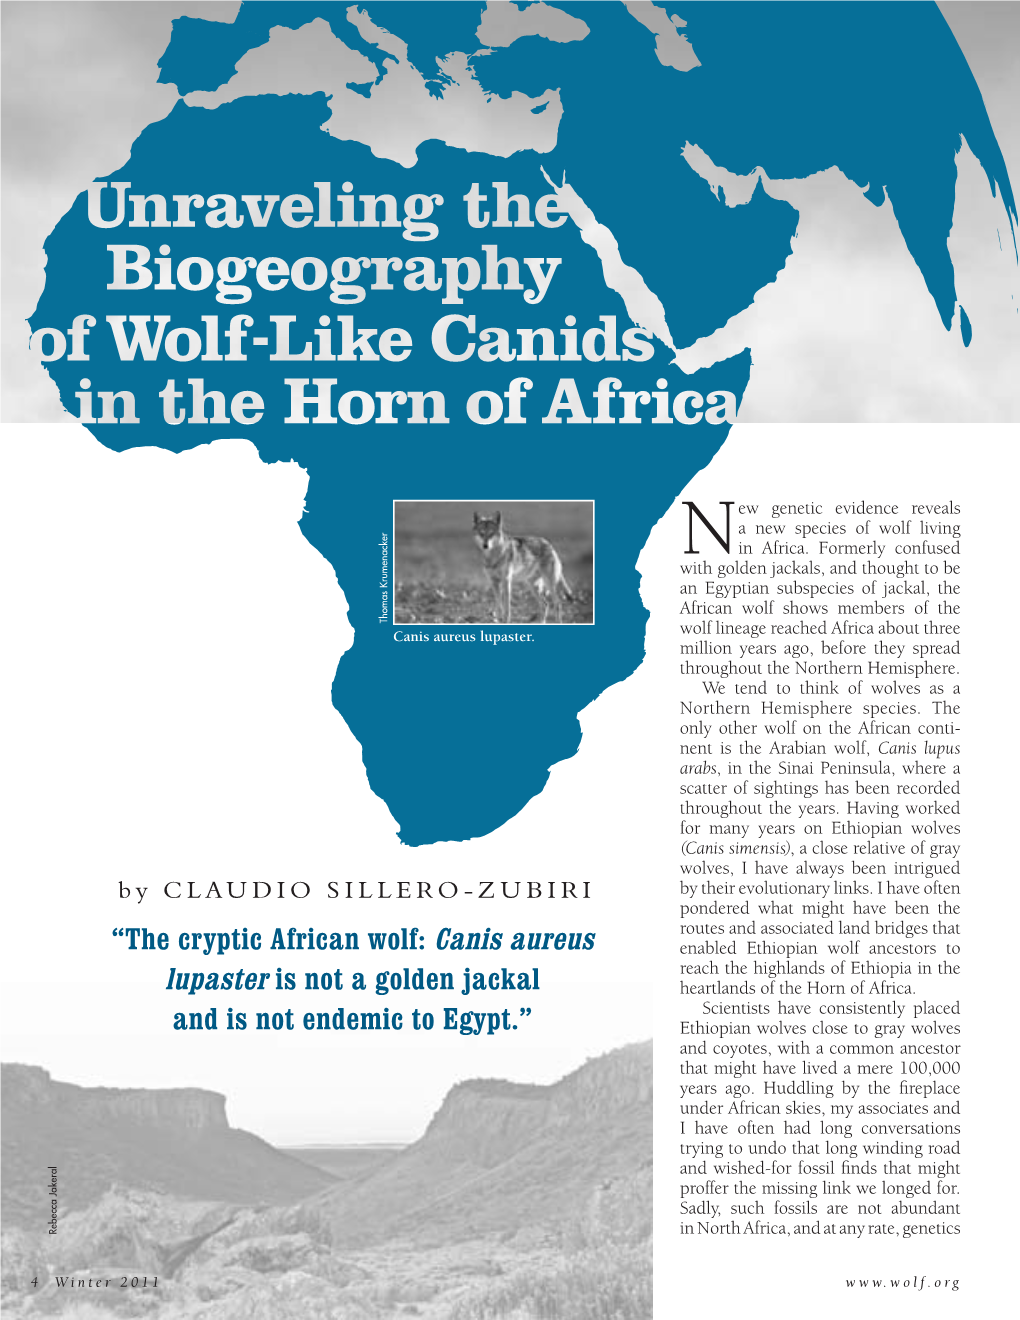 “The Cryptic African Wolf: Canis Aureus Lupaster Is Not a Golden Jackal And